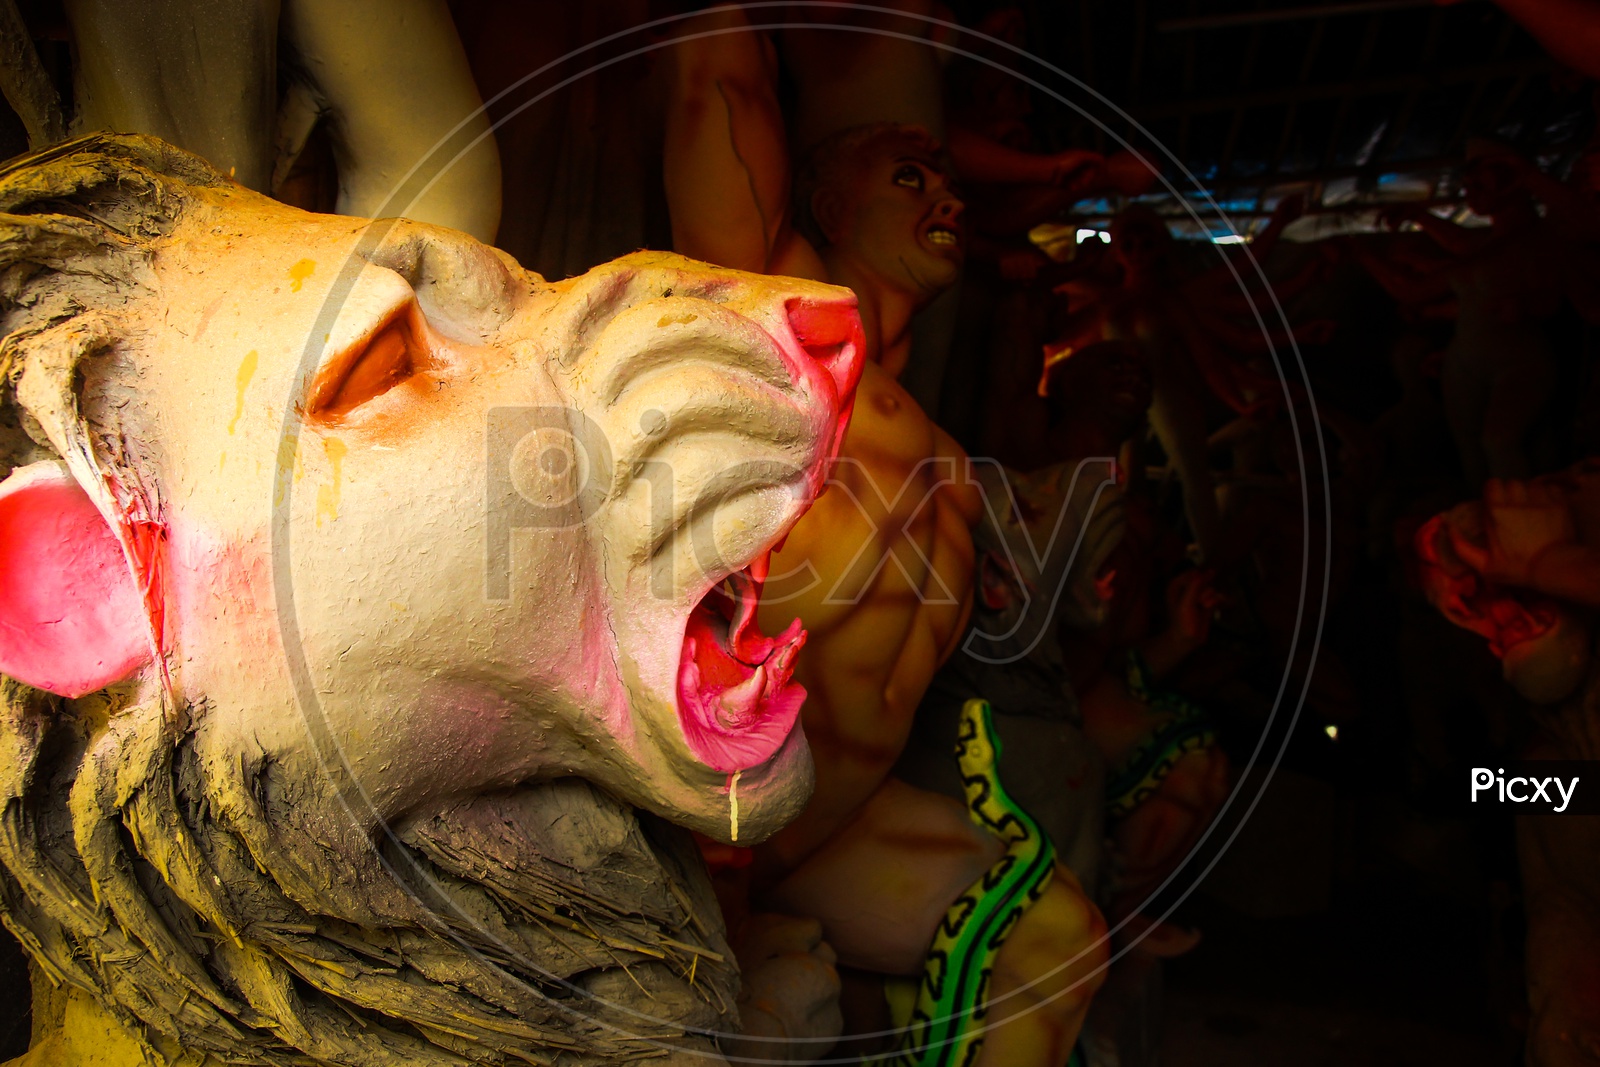 Kumartuli,West Bengal, India, July 2018. A Clay Idol Of Lion,Showing Large Sharp Canine Teeth. Lion Is The Ride Of Goddess Durga And Durga Puja Is The Most Awaited Hindu Festival Worldwide.